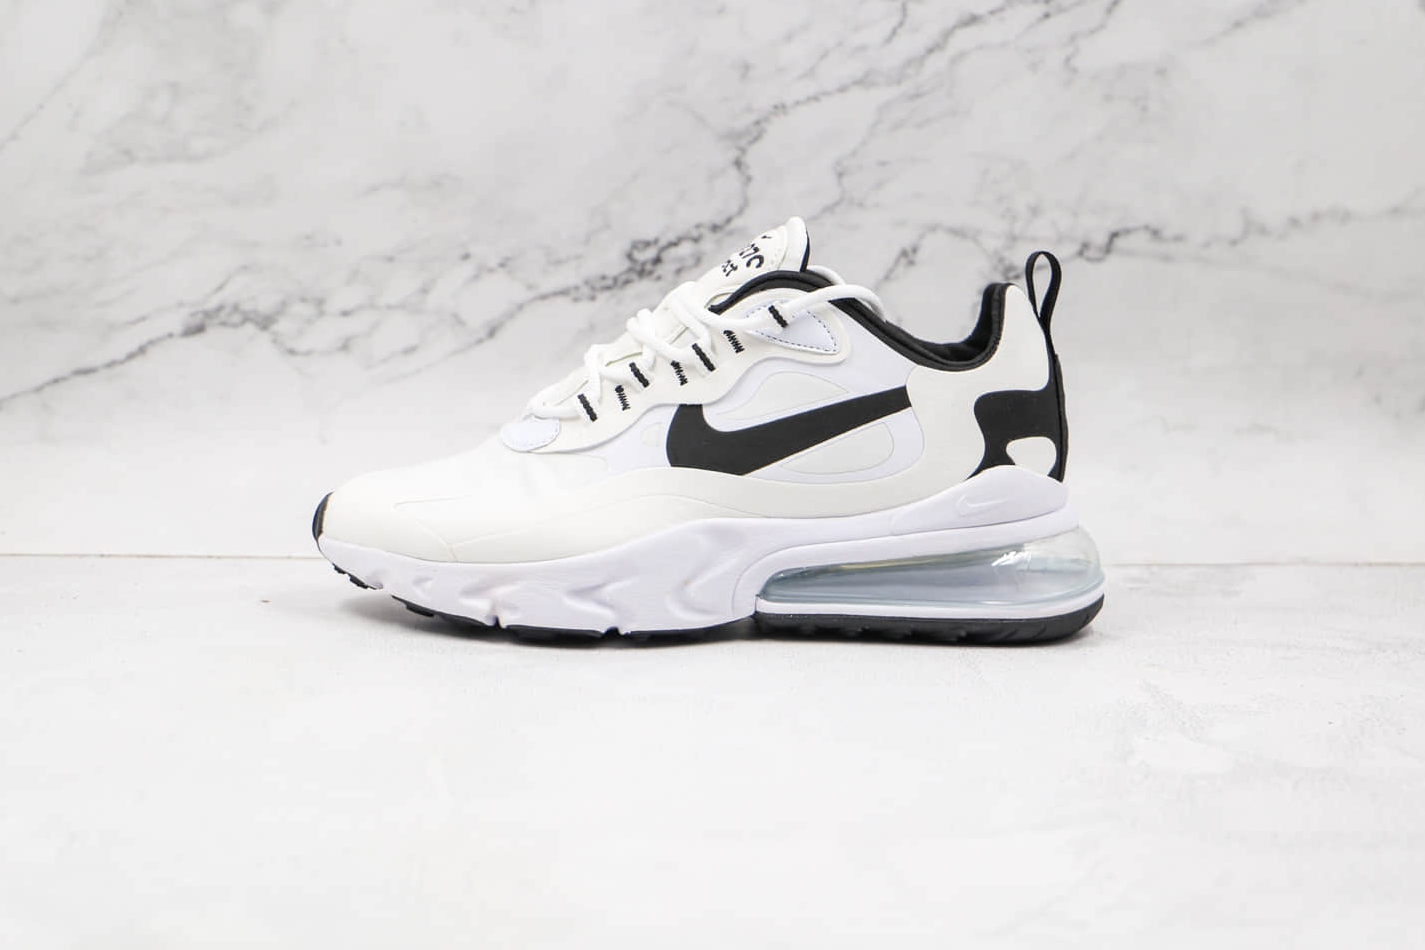 Nike Air Max 270 React 'White Black' CT1264-102 - Stylish Comfort for Every Step